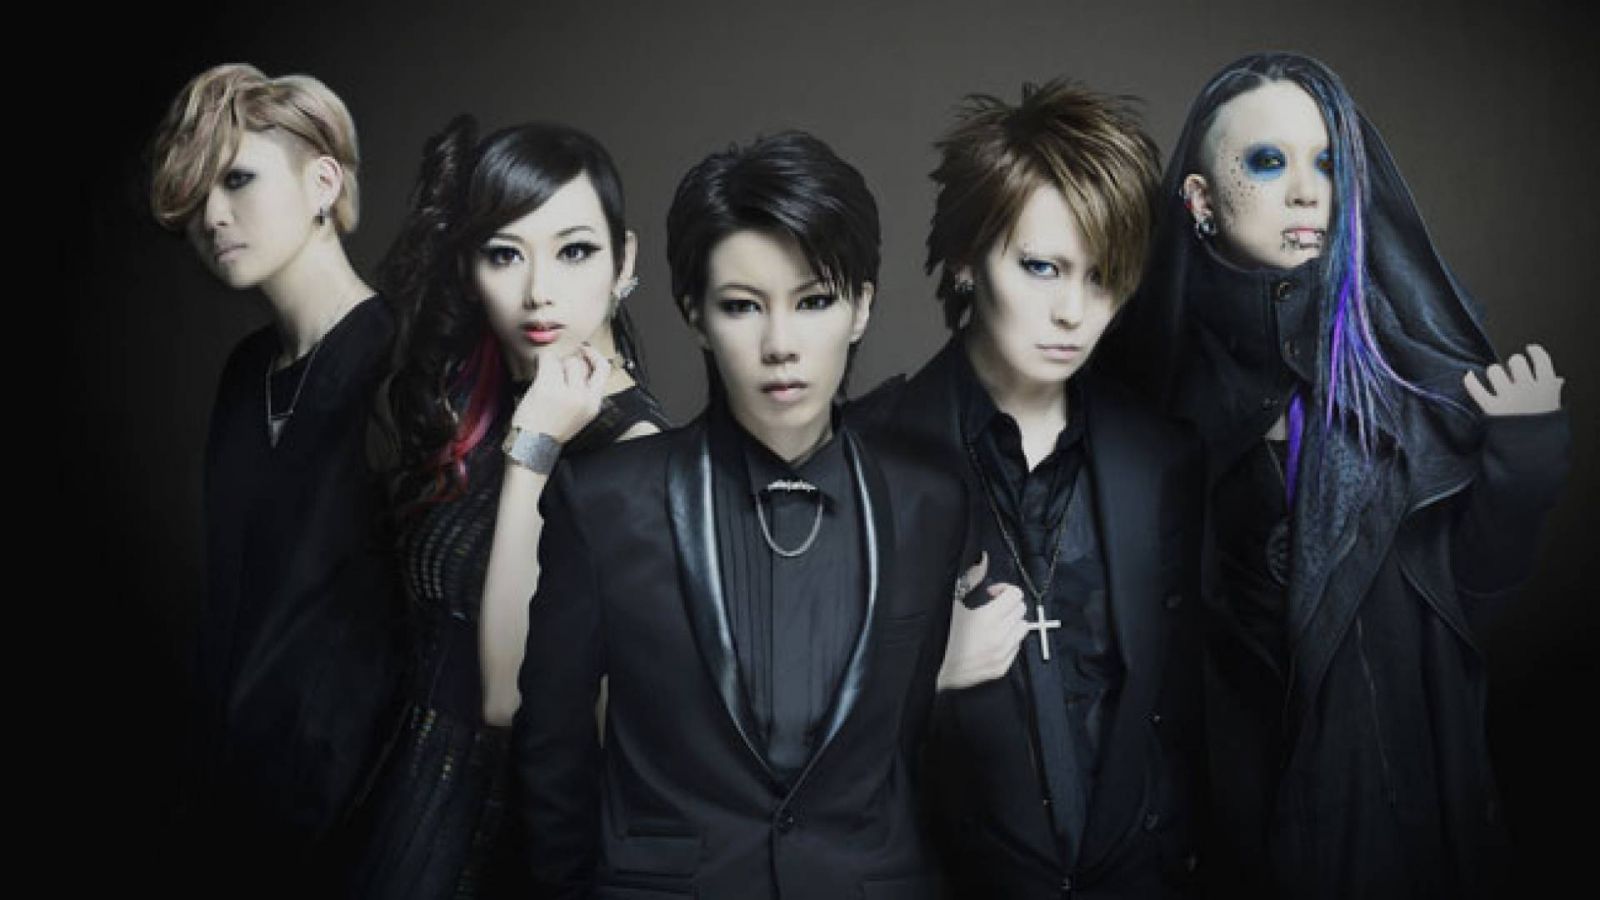 exist†trace - THIS IS NOW © Monster's Inc. All rights reserved.